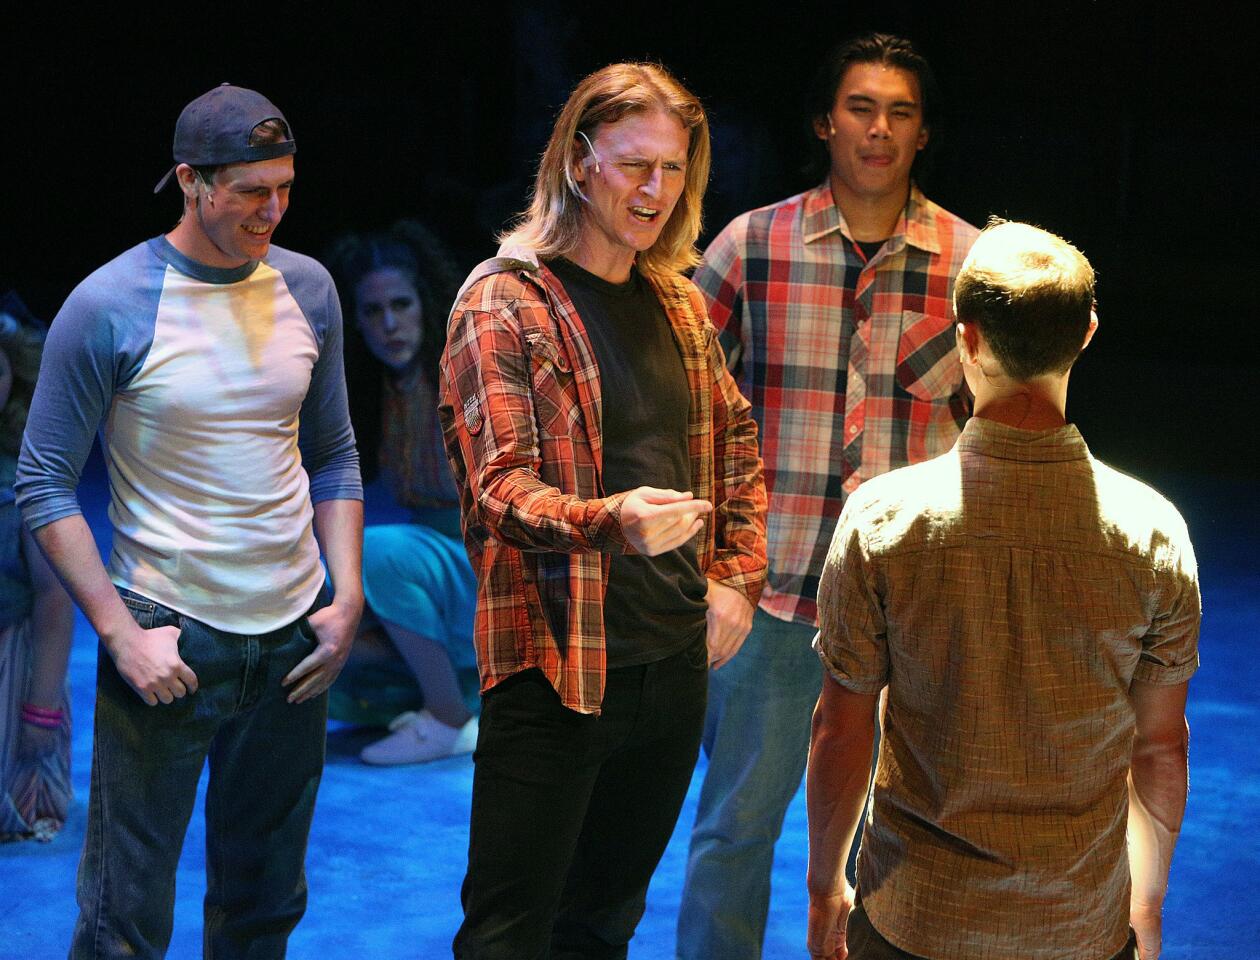 A confrontational scene during a dress rehearsal at the Glendale Centre Theatre. The show runs through October 7.